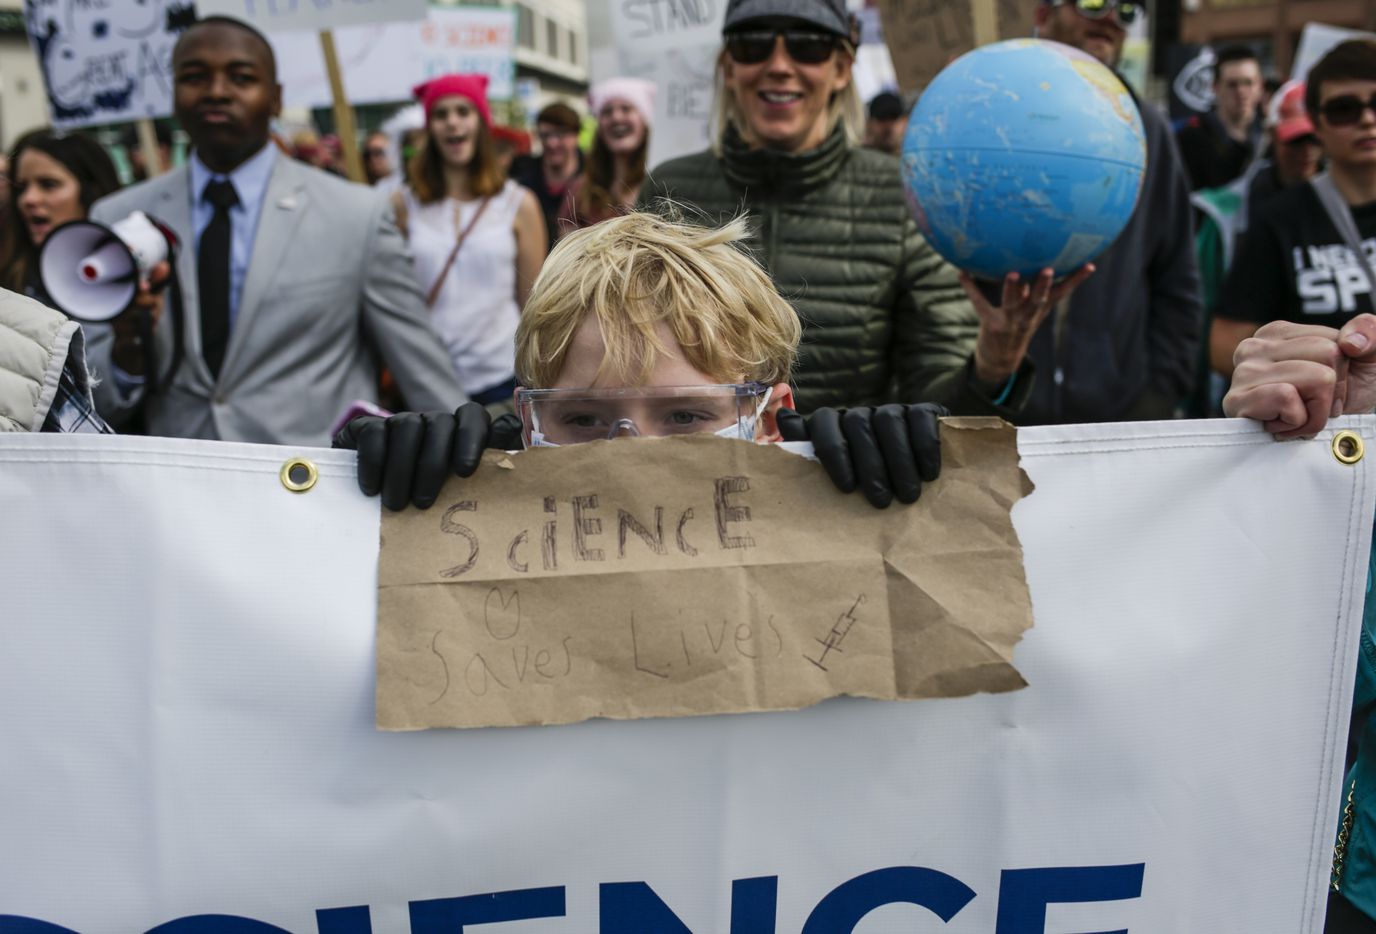 Dylan Sawyer, 12, of Boulder, Colo., during the March for Science in Denver, April 22, 2017....